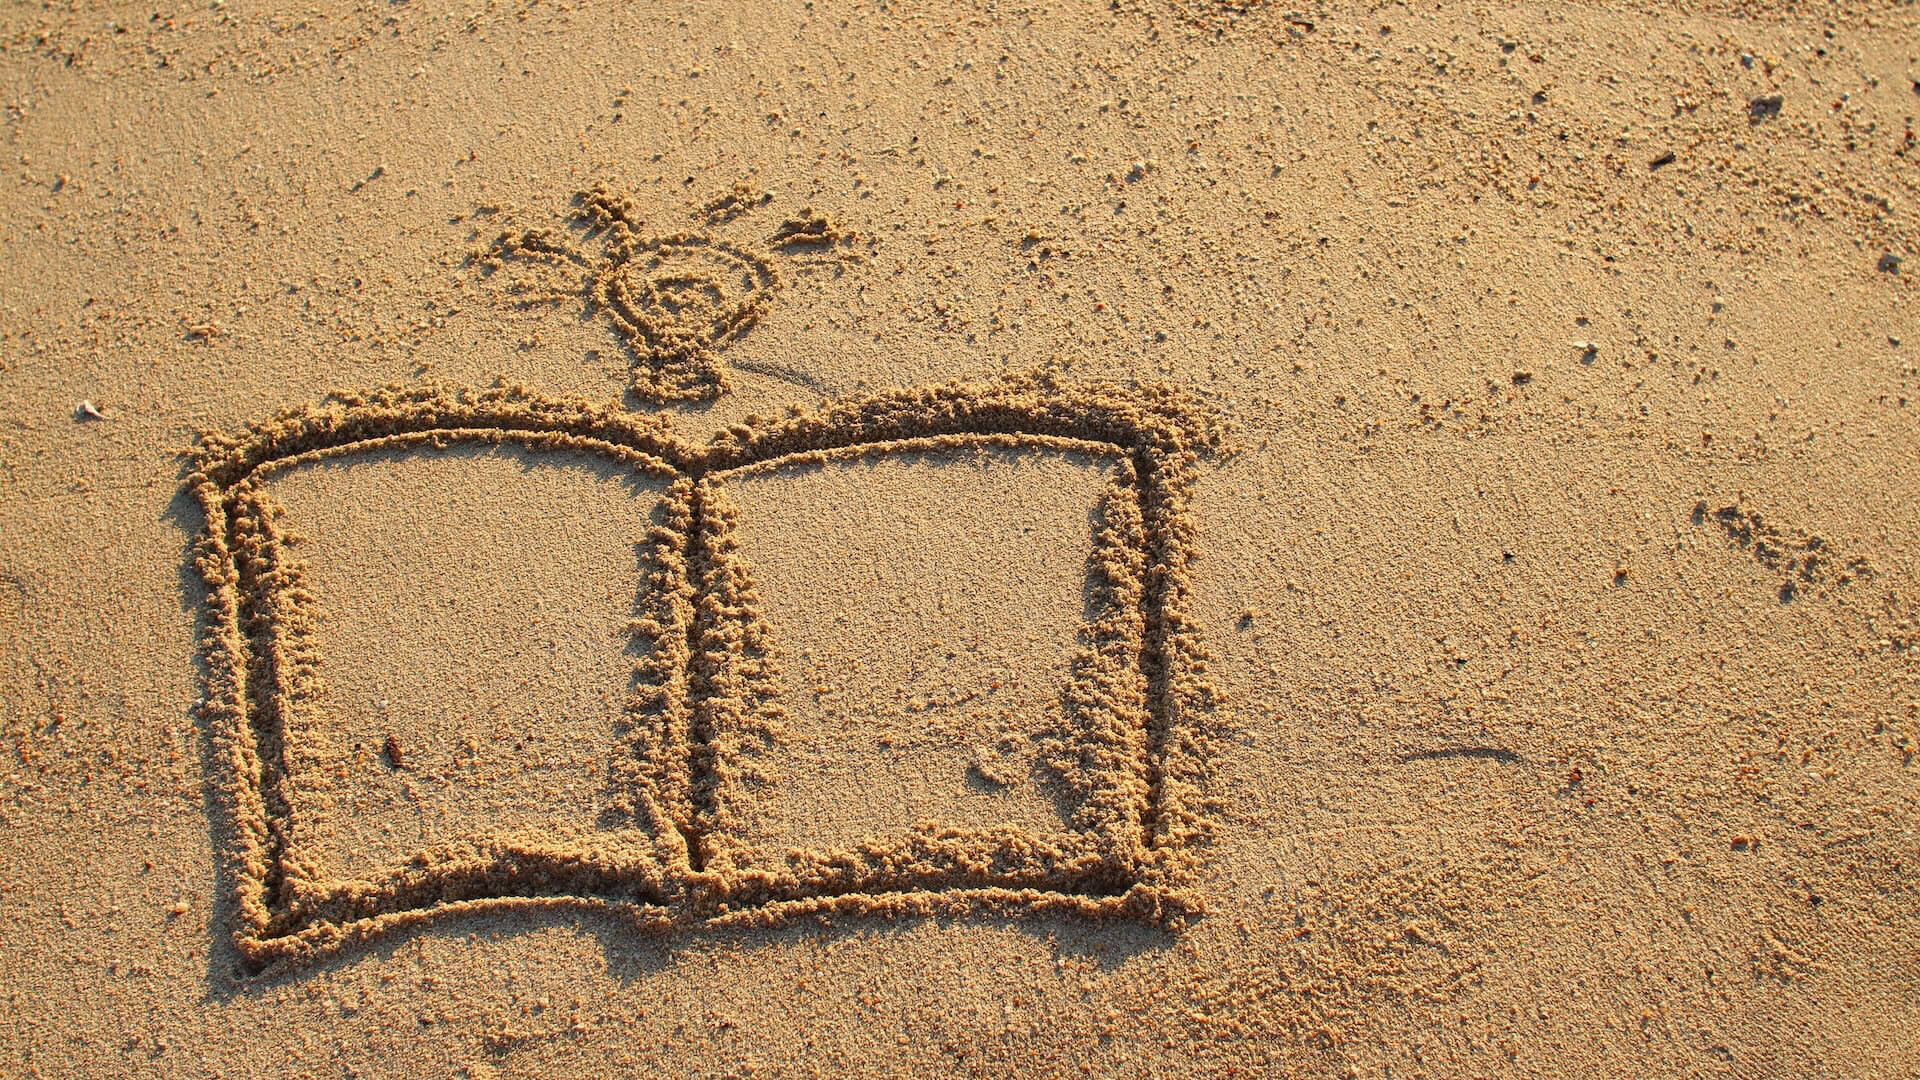 An open book and light bulb above it carved into the sand.